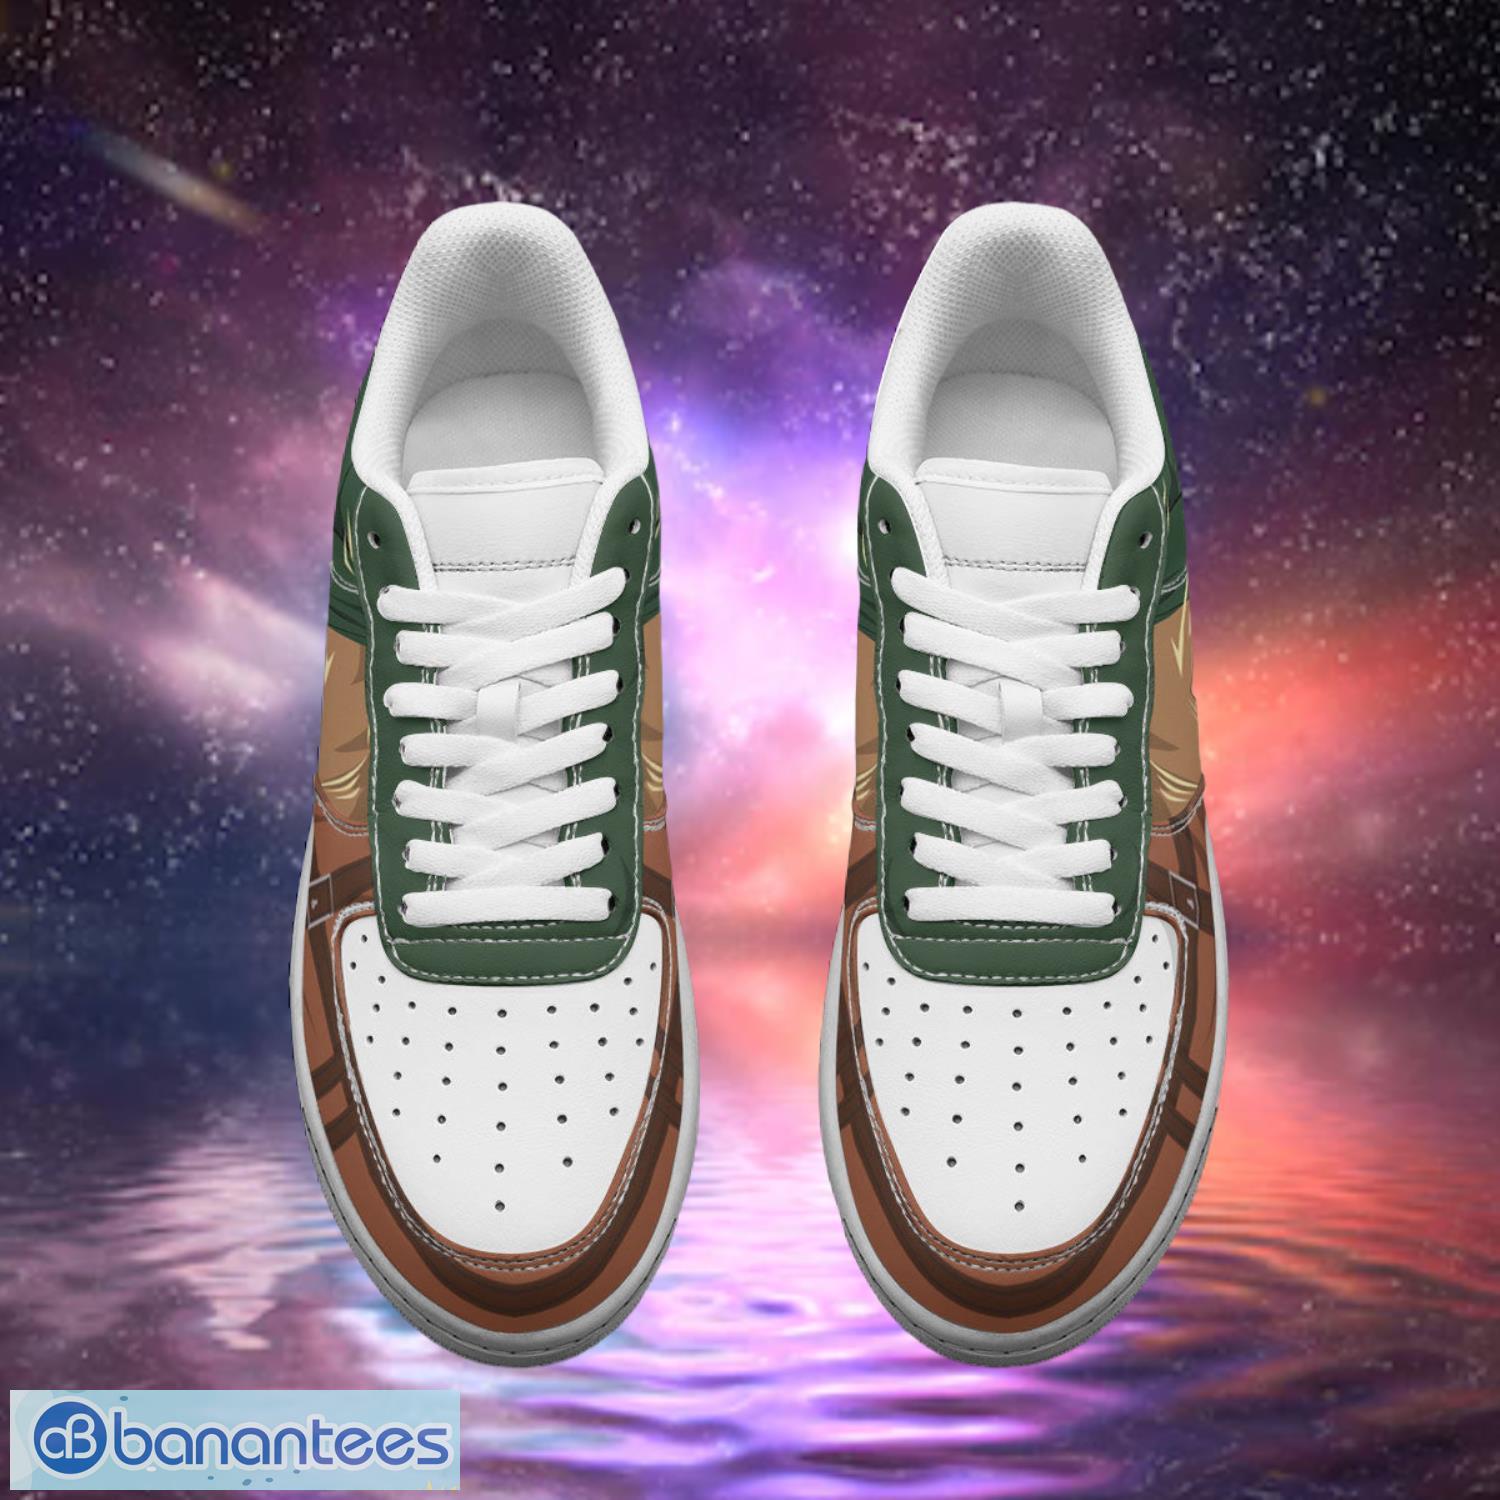 Attack On Titan Air Sneakers Reconnaissance Army Custom Anime Shoes Product Photo 2